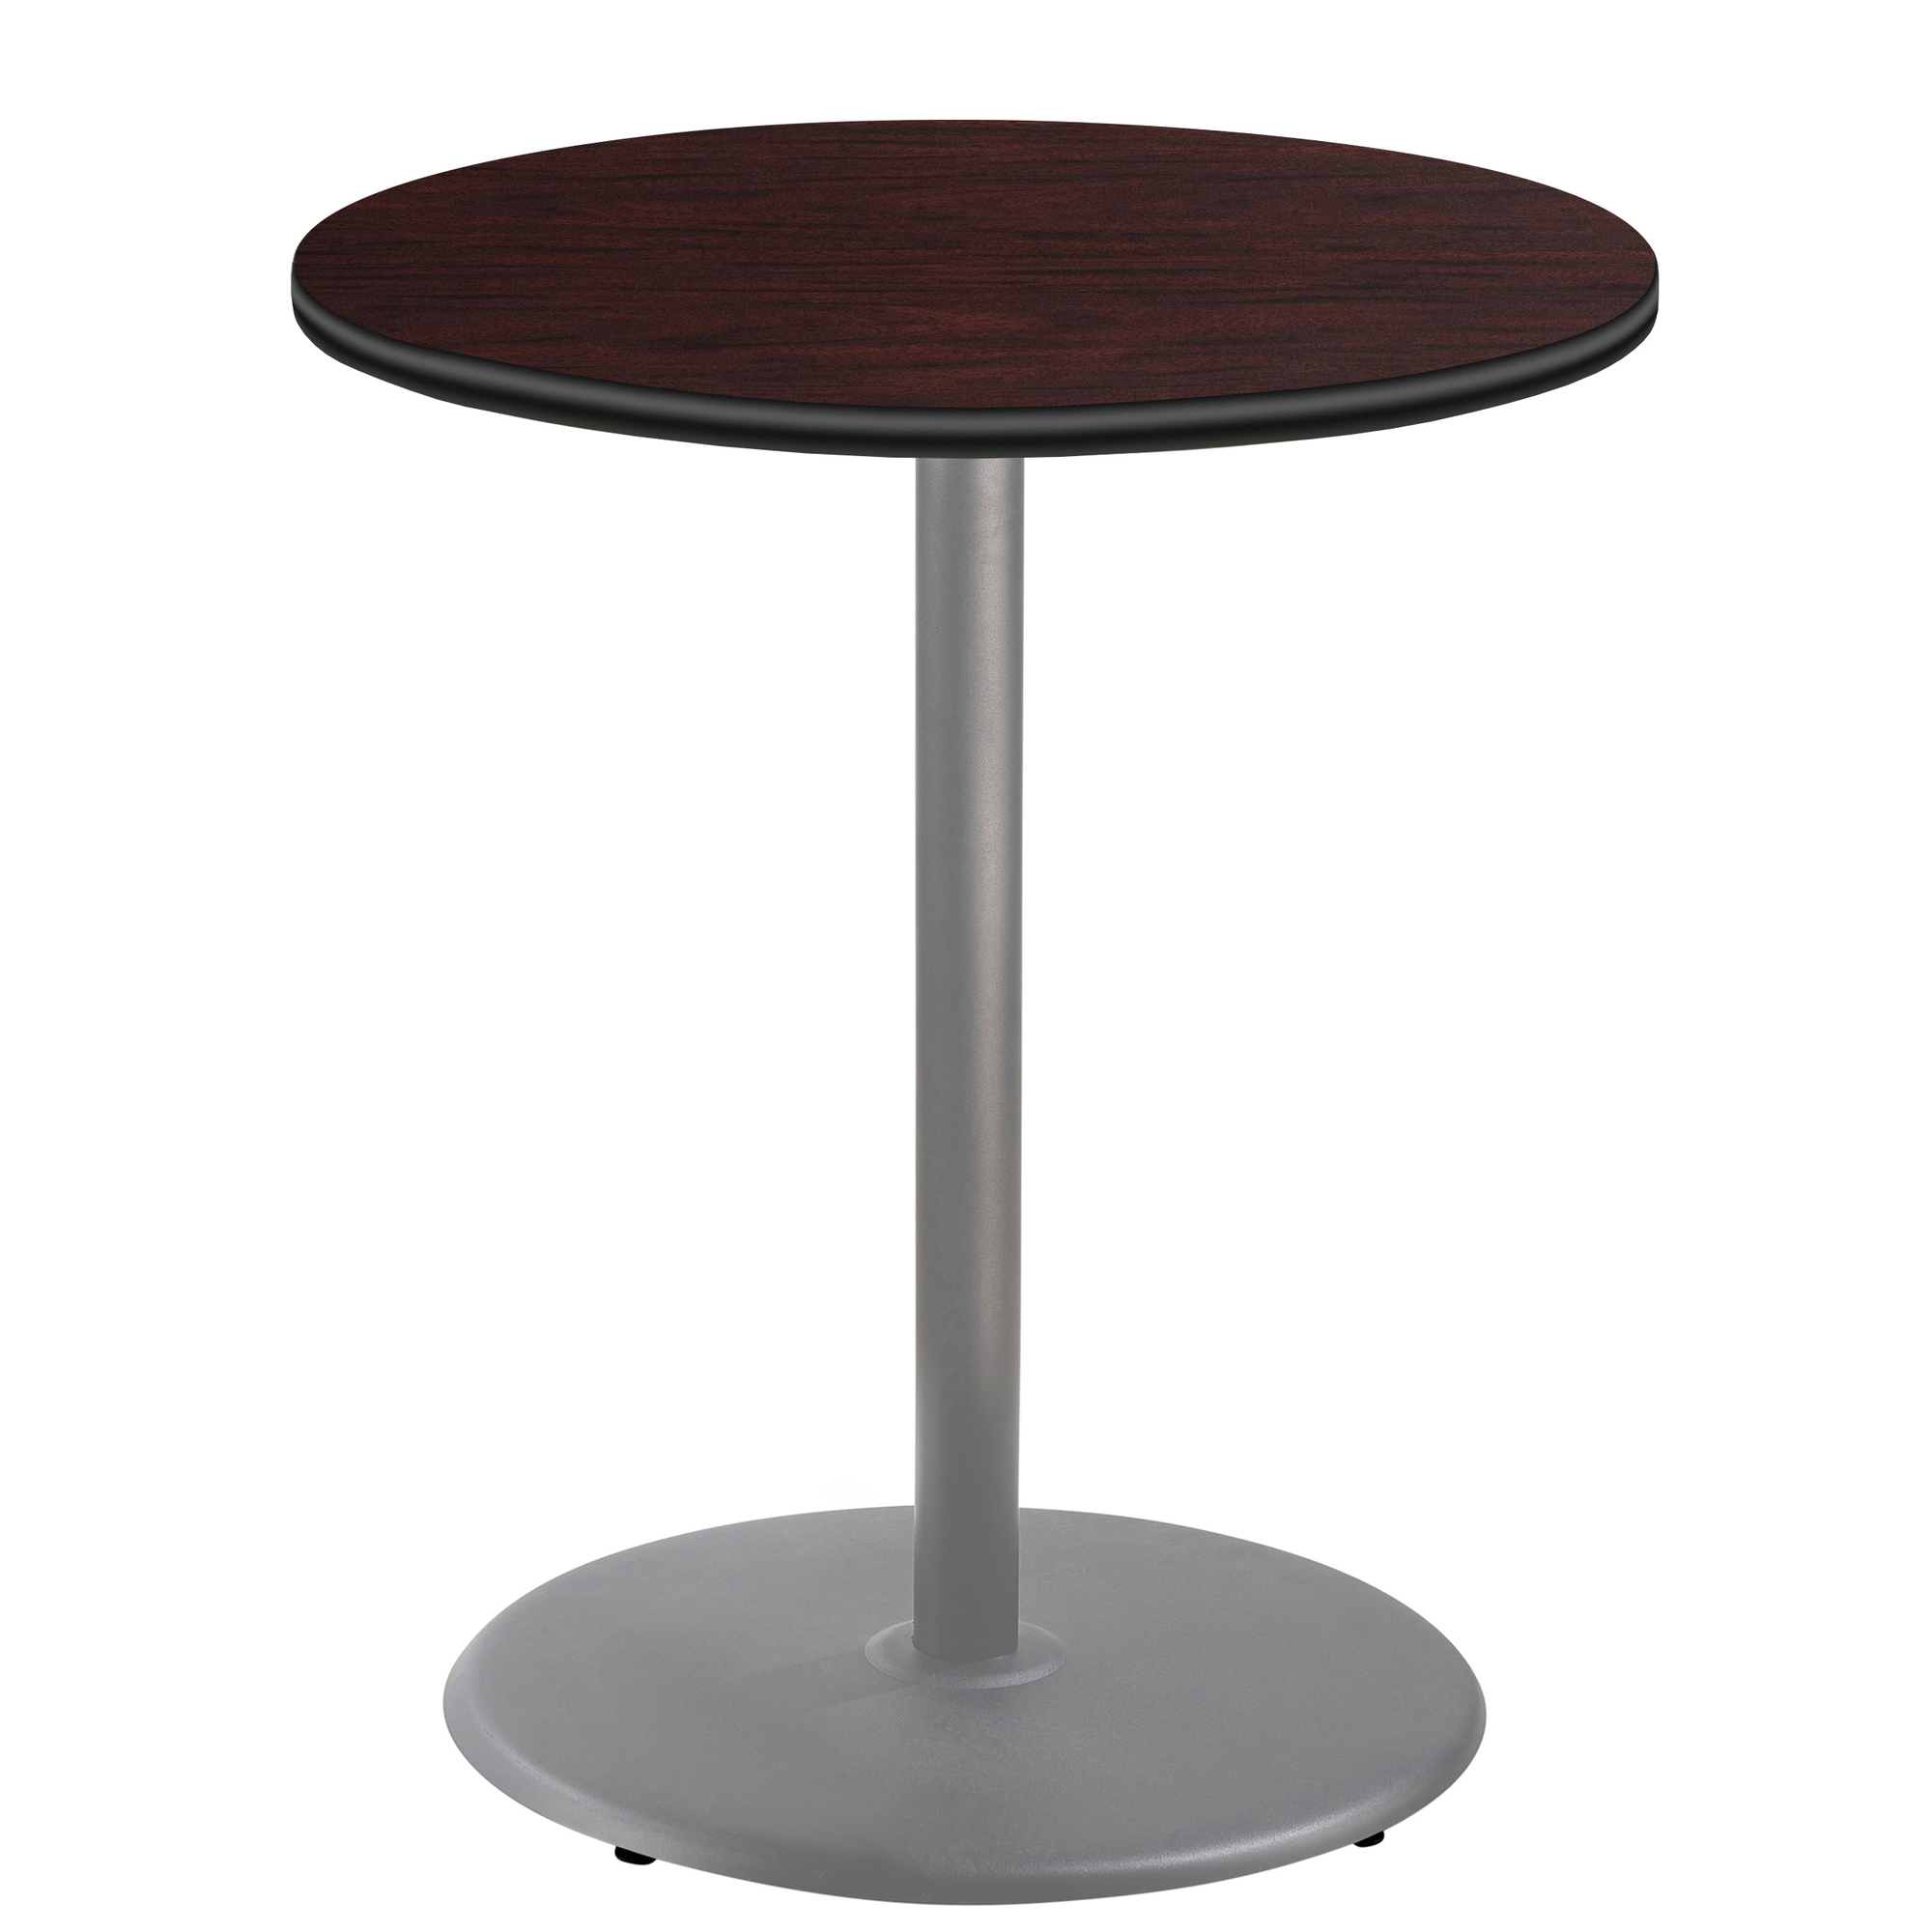 "National Public Seating, Cafe Table, 36x36x42Round ""R"" Base, Height 42 in, Model CTG13636RBPBTMMY"